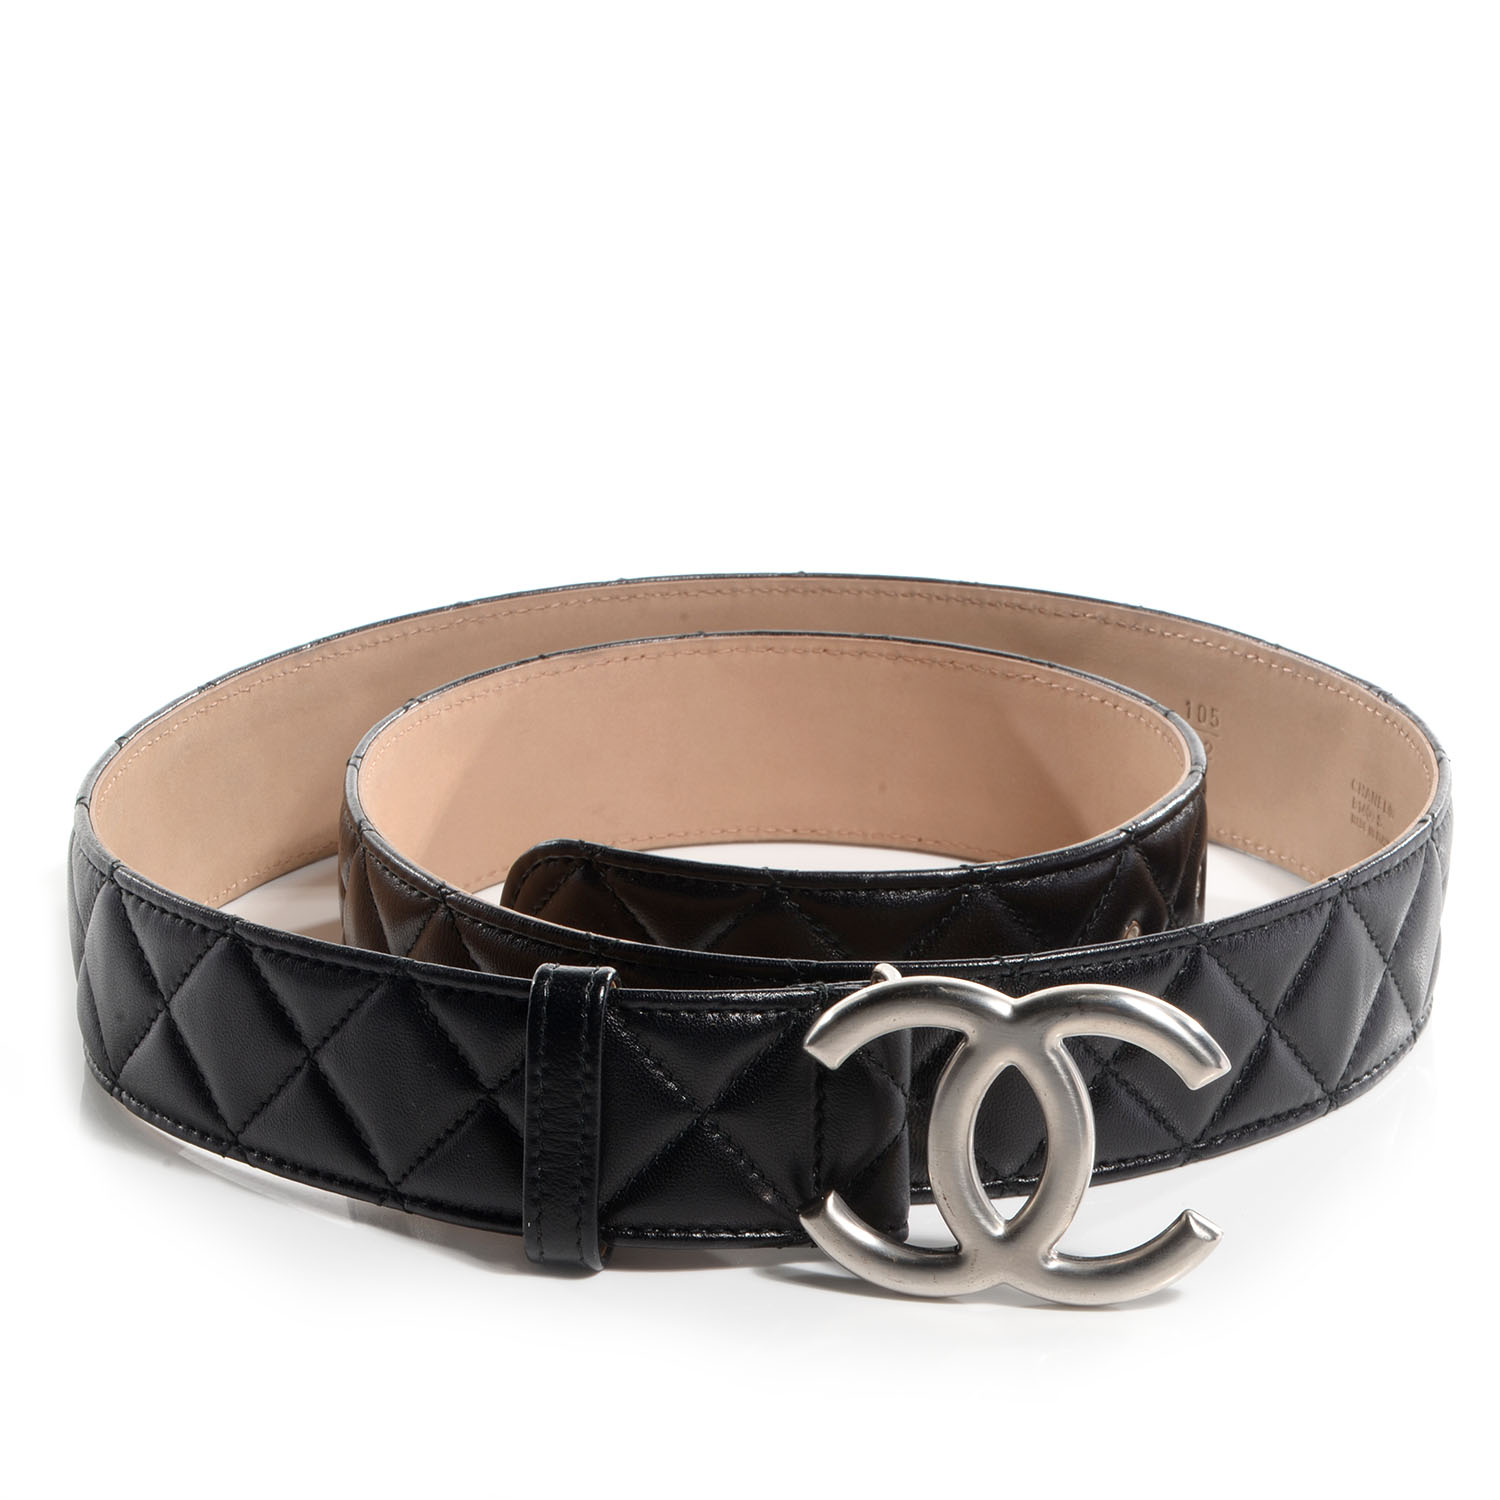 CHANEL Lambskin Quilted CC Belt 105 42 Black 72261